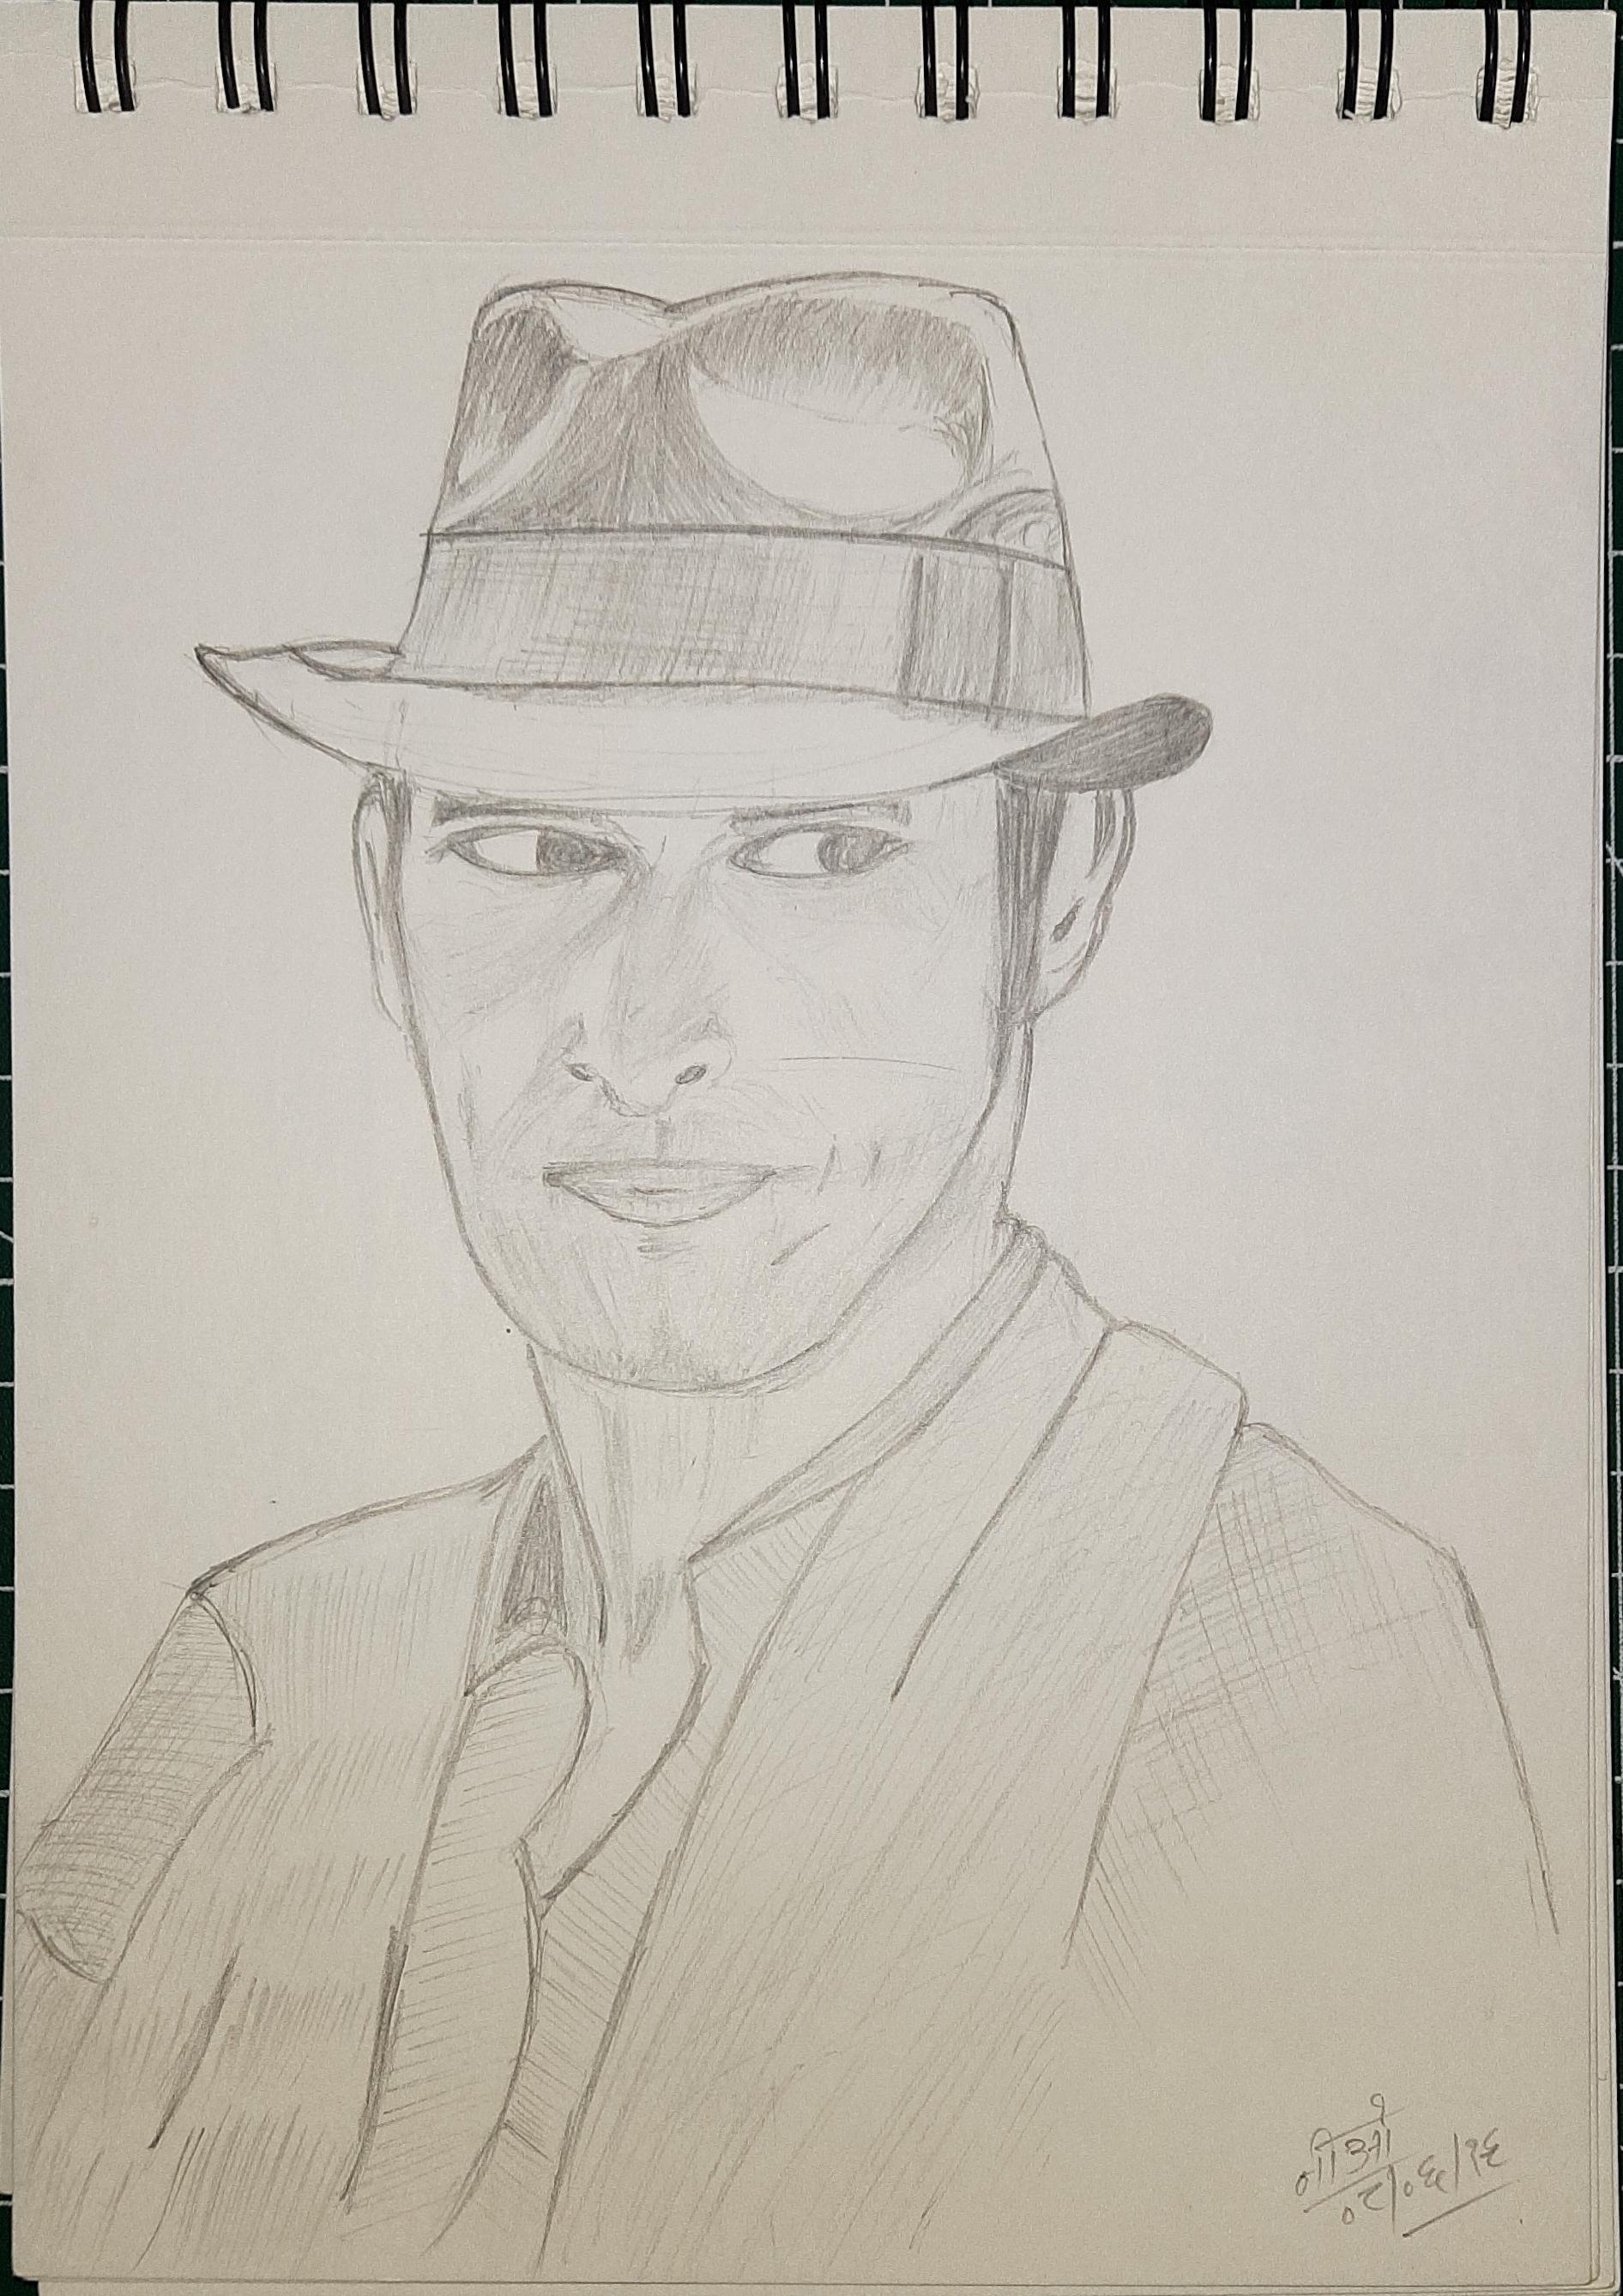 Detective Miller from Expanse